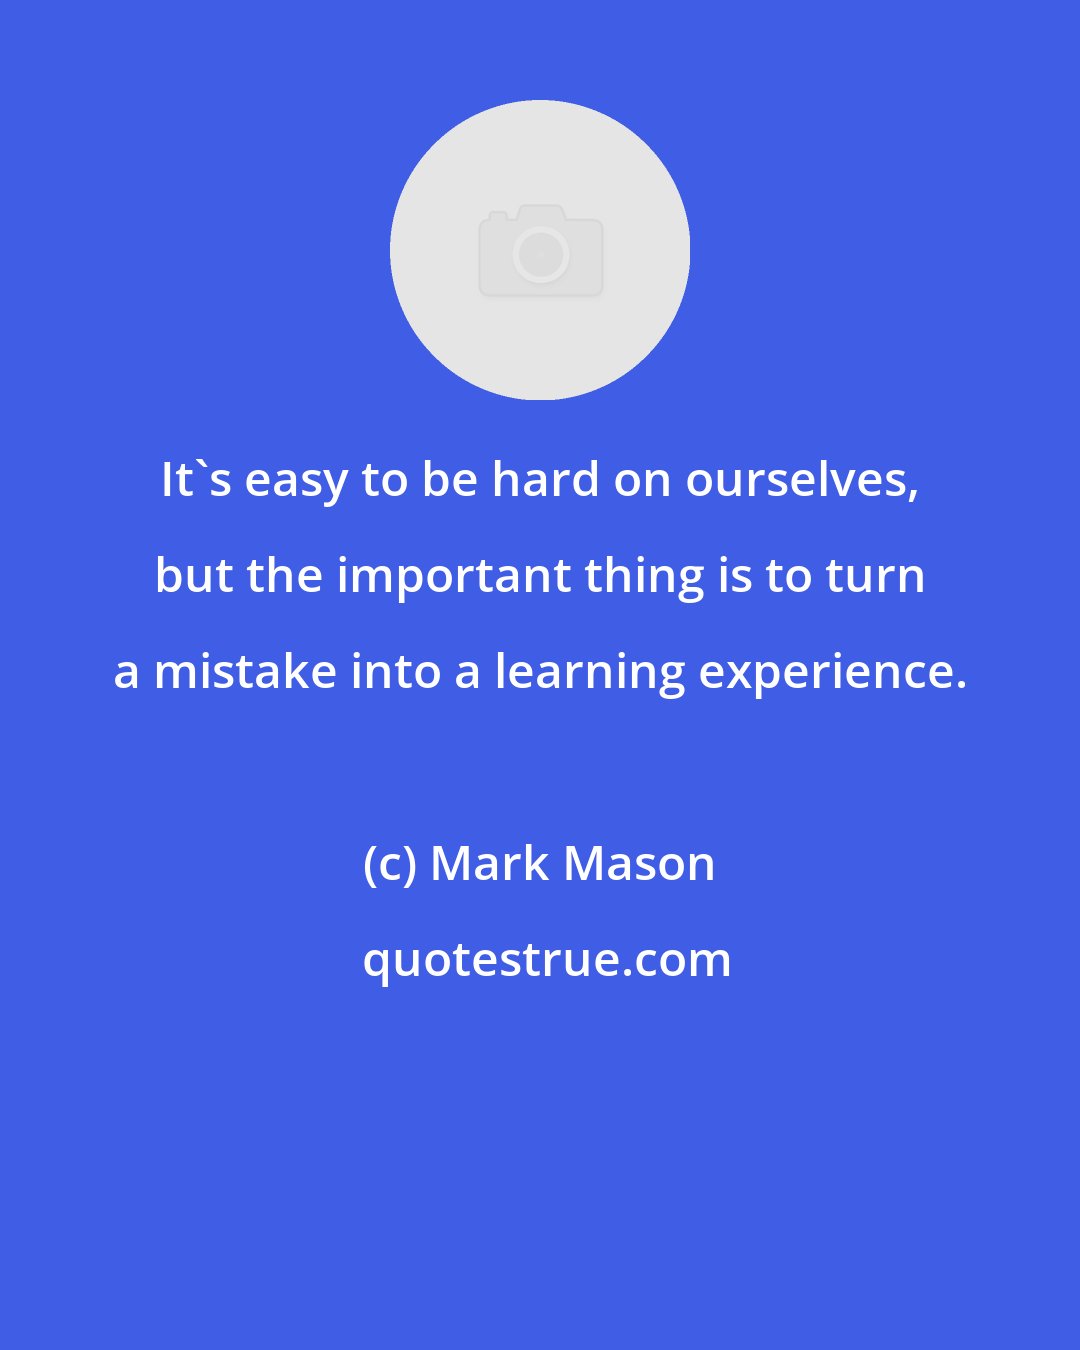 Mark Mason: It's easy to be hard on ourselves, but the important thing is to turn a mistake into a learning experience.